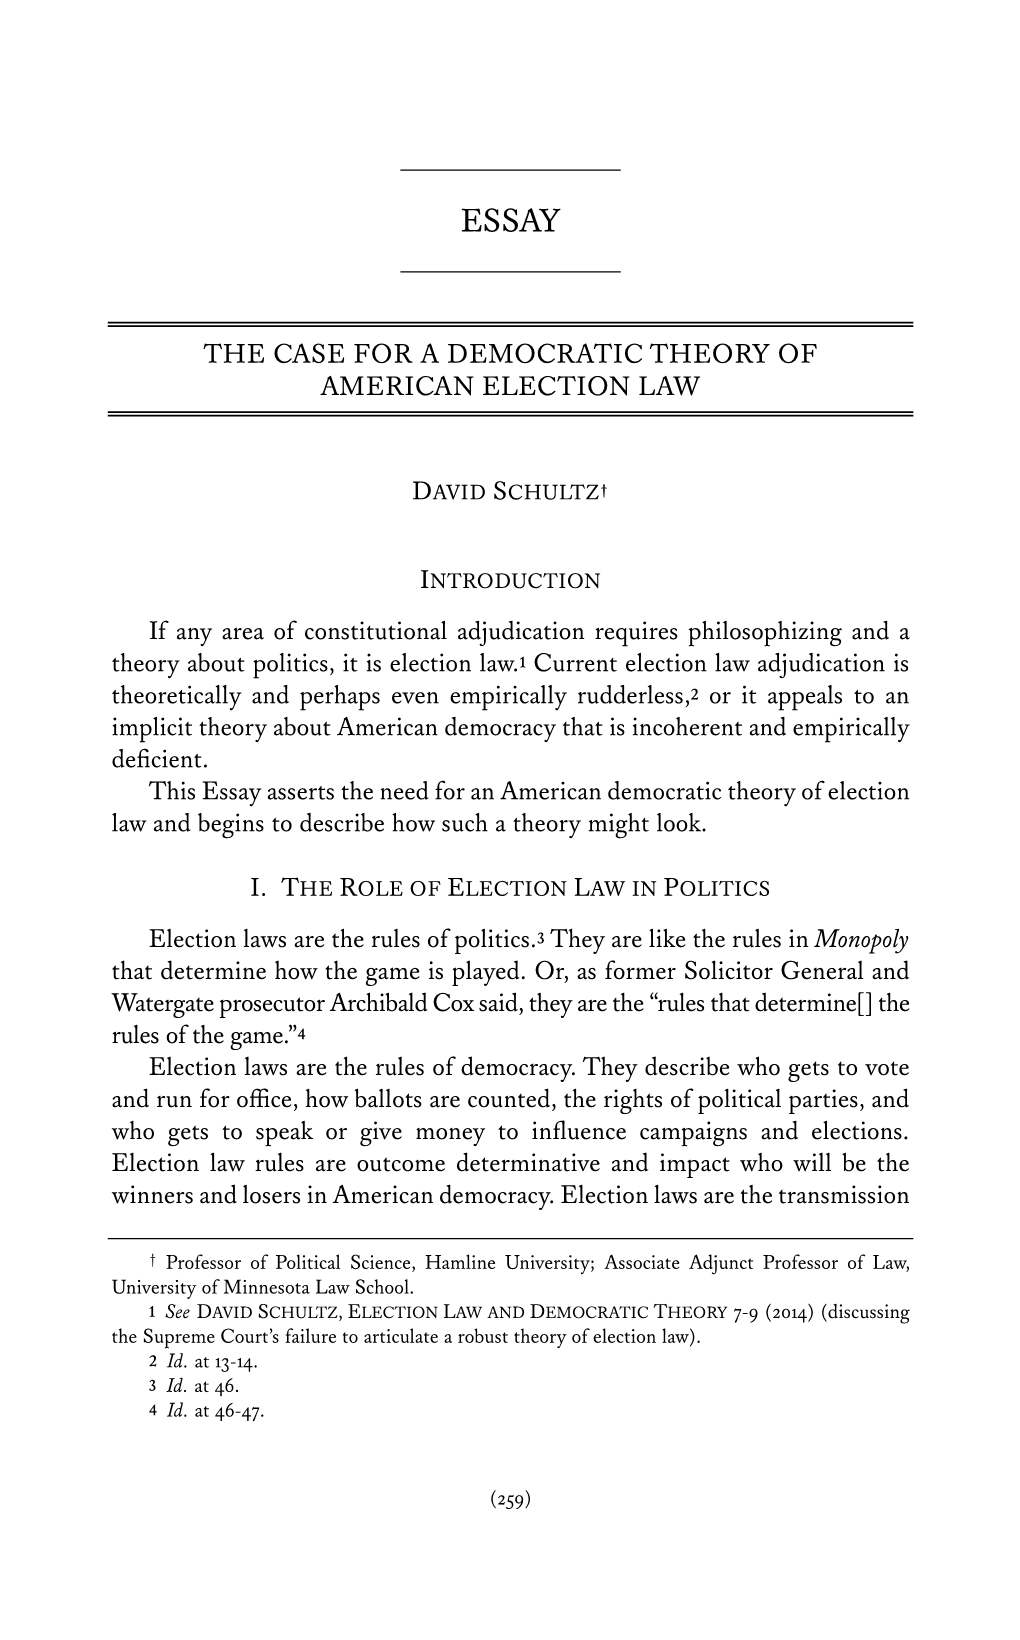 The Case for a Democratic Theory of American Election Law